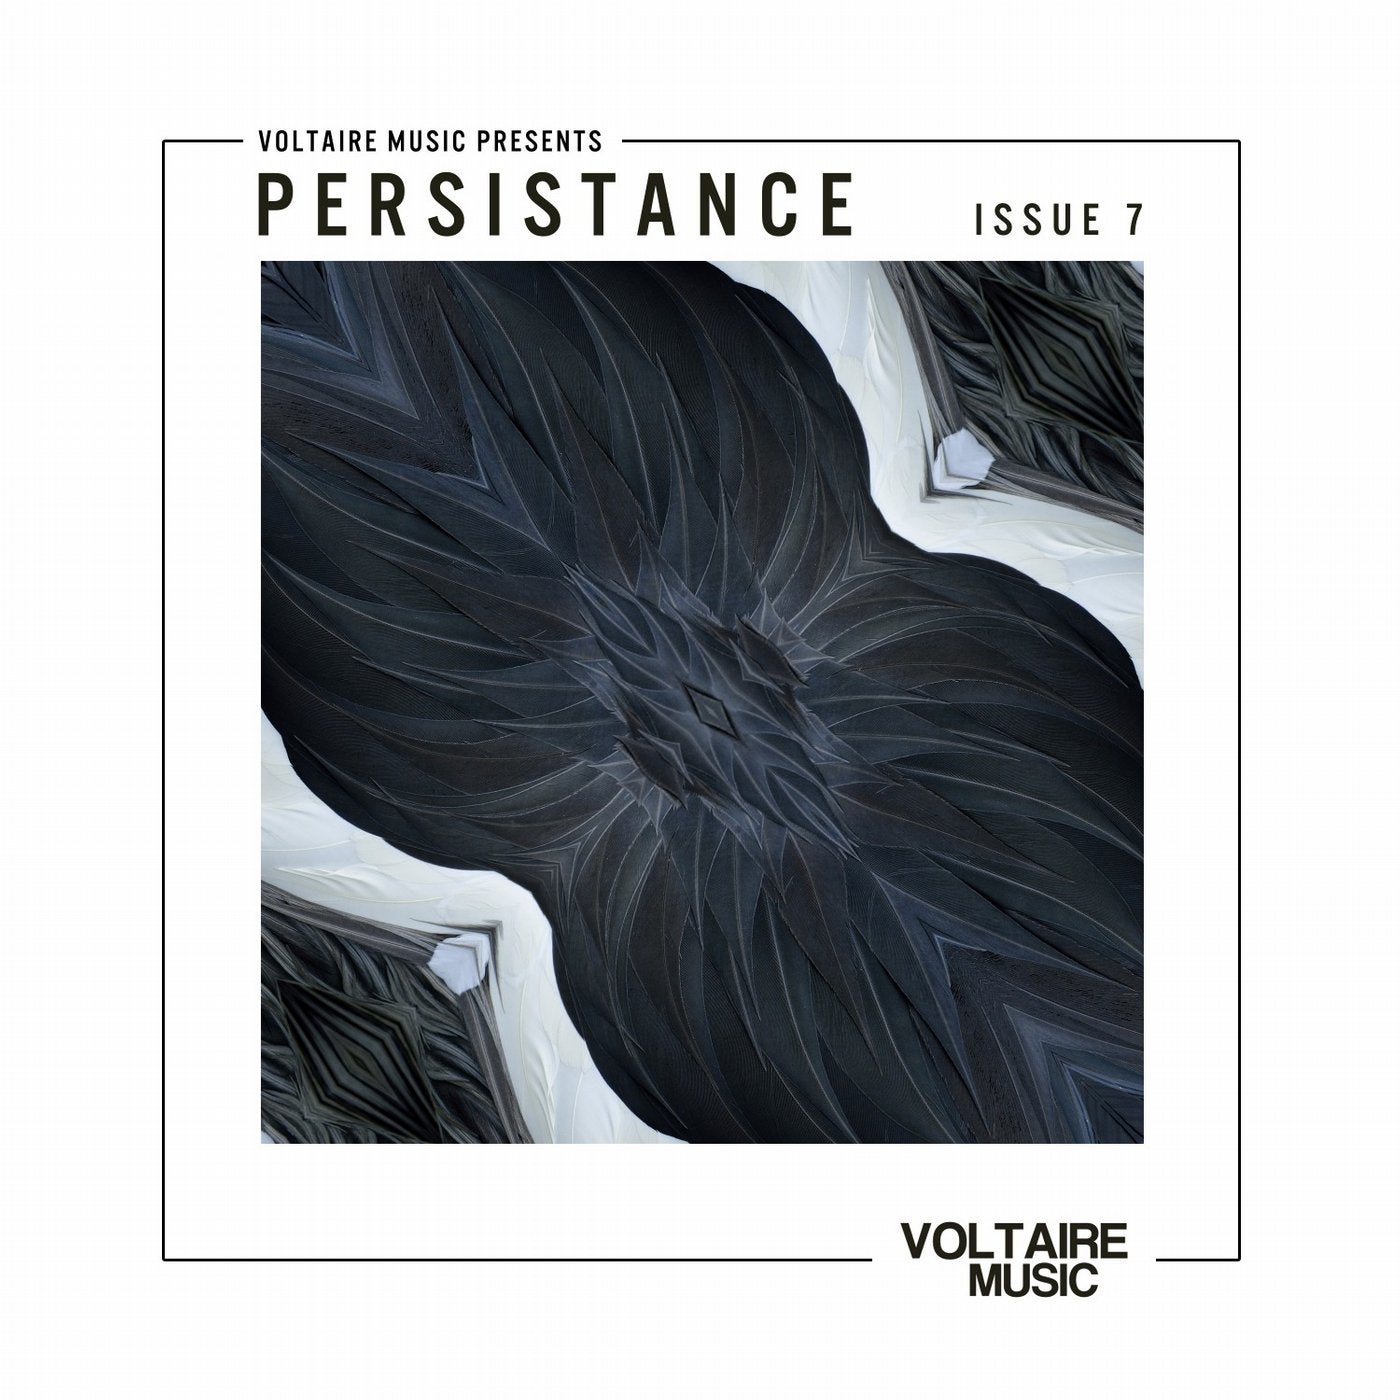 Voltaire Music pres. Persistence #7